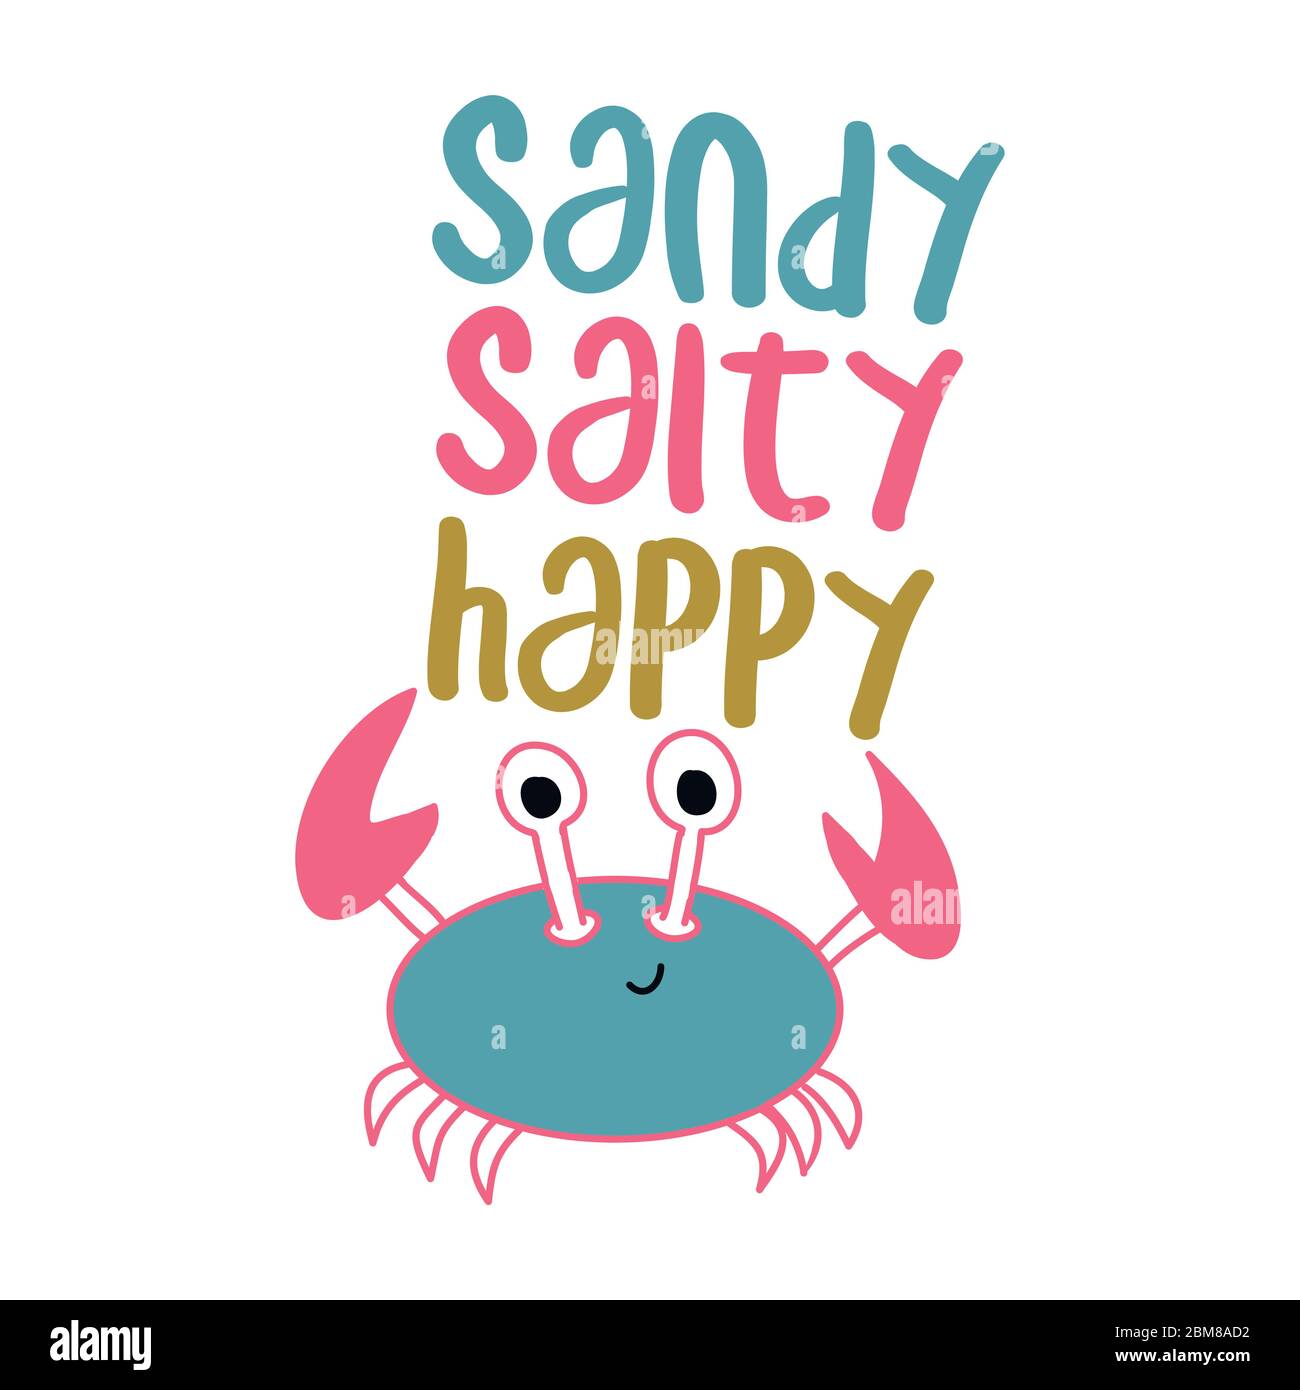 Sandy salty happy - T-Shirts, Hoodie, Tank. Vector illustration text for children clothes. Inspirational quote card, invitation, banner. Kids calligra Stock Vector